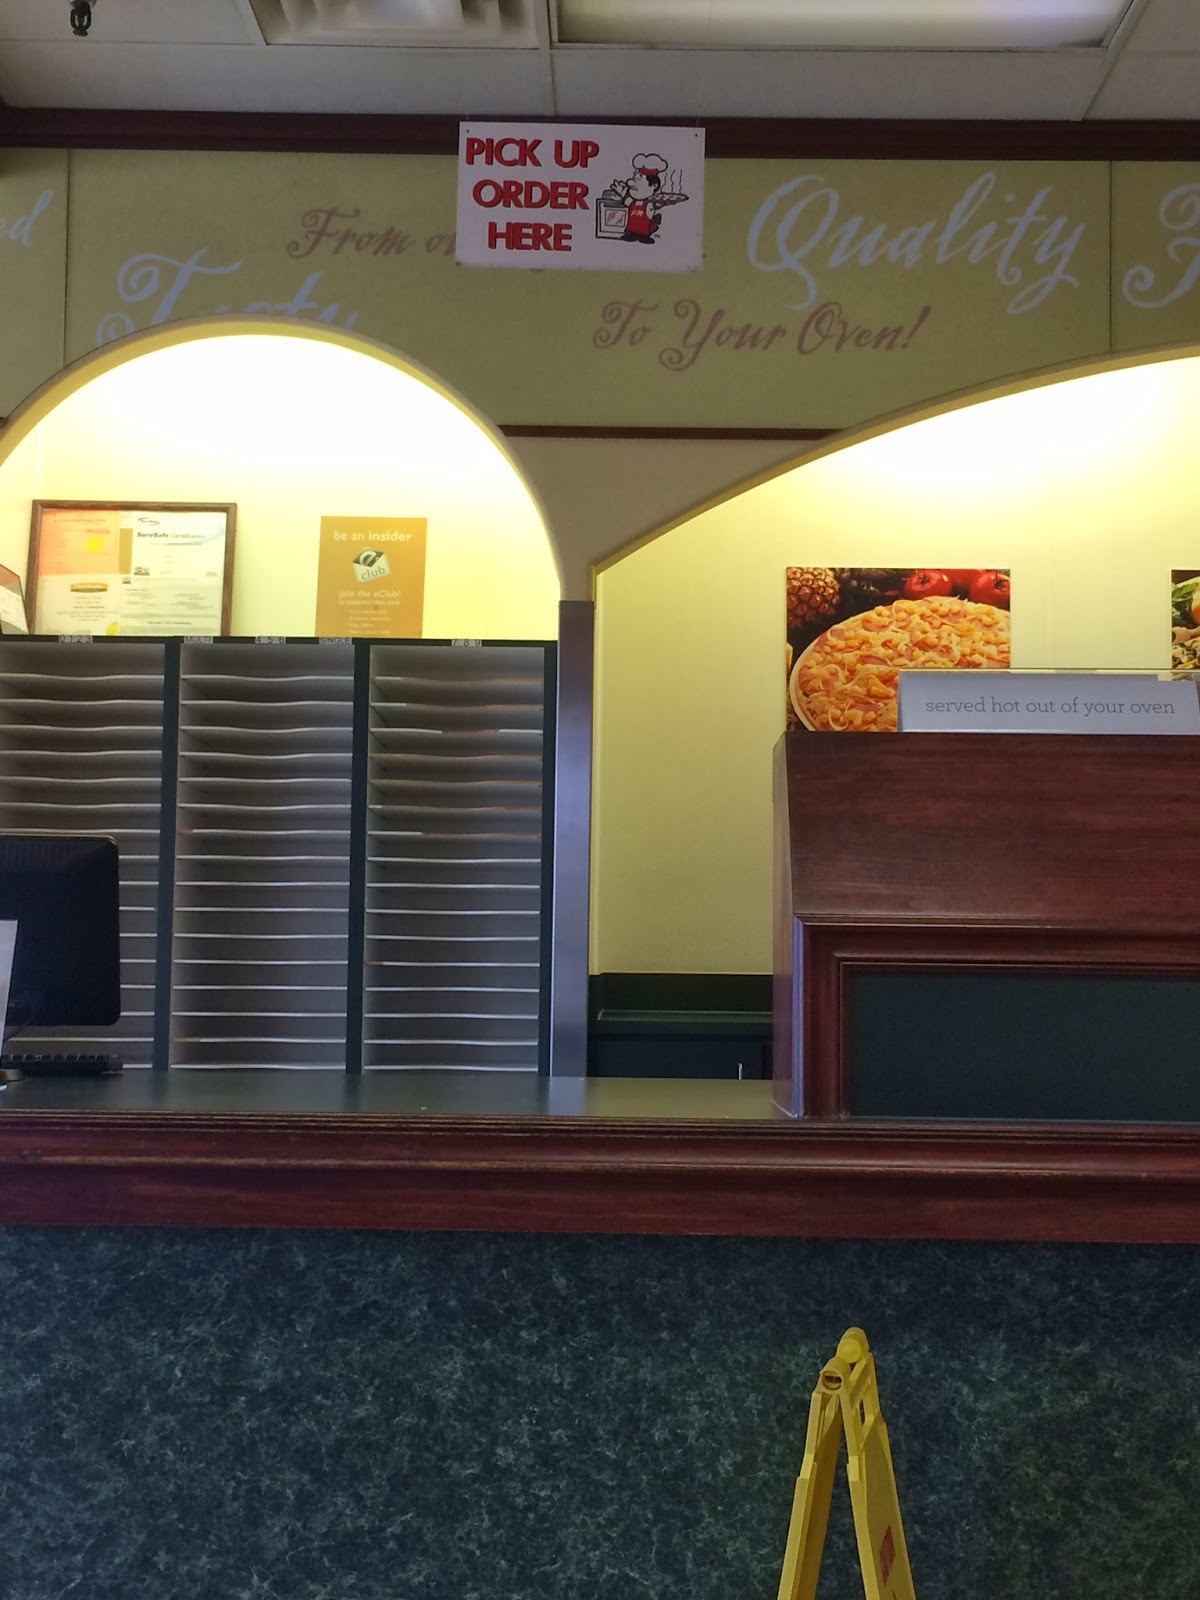 Behind the Counter: Papa Murphy's Pizza